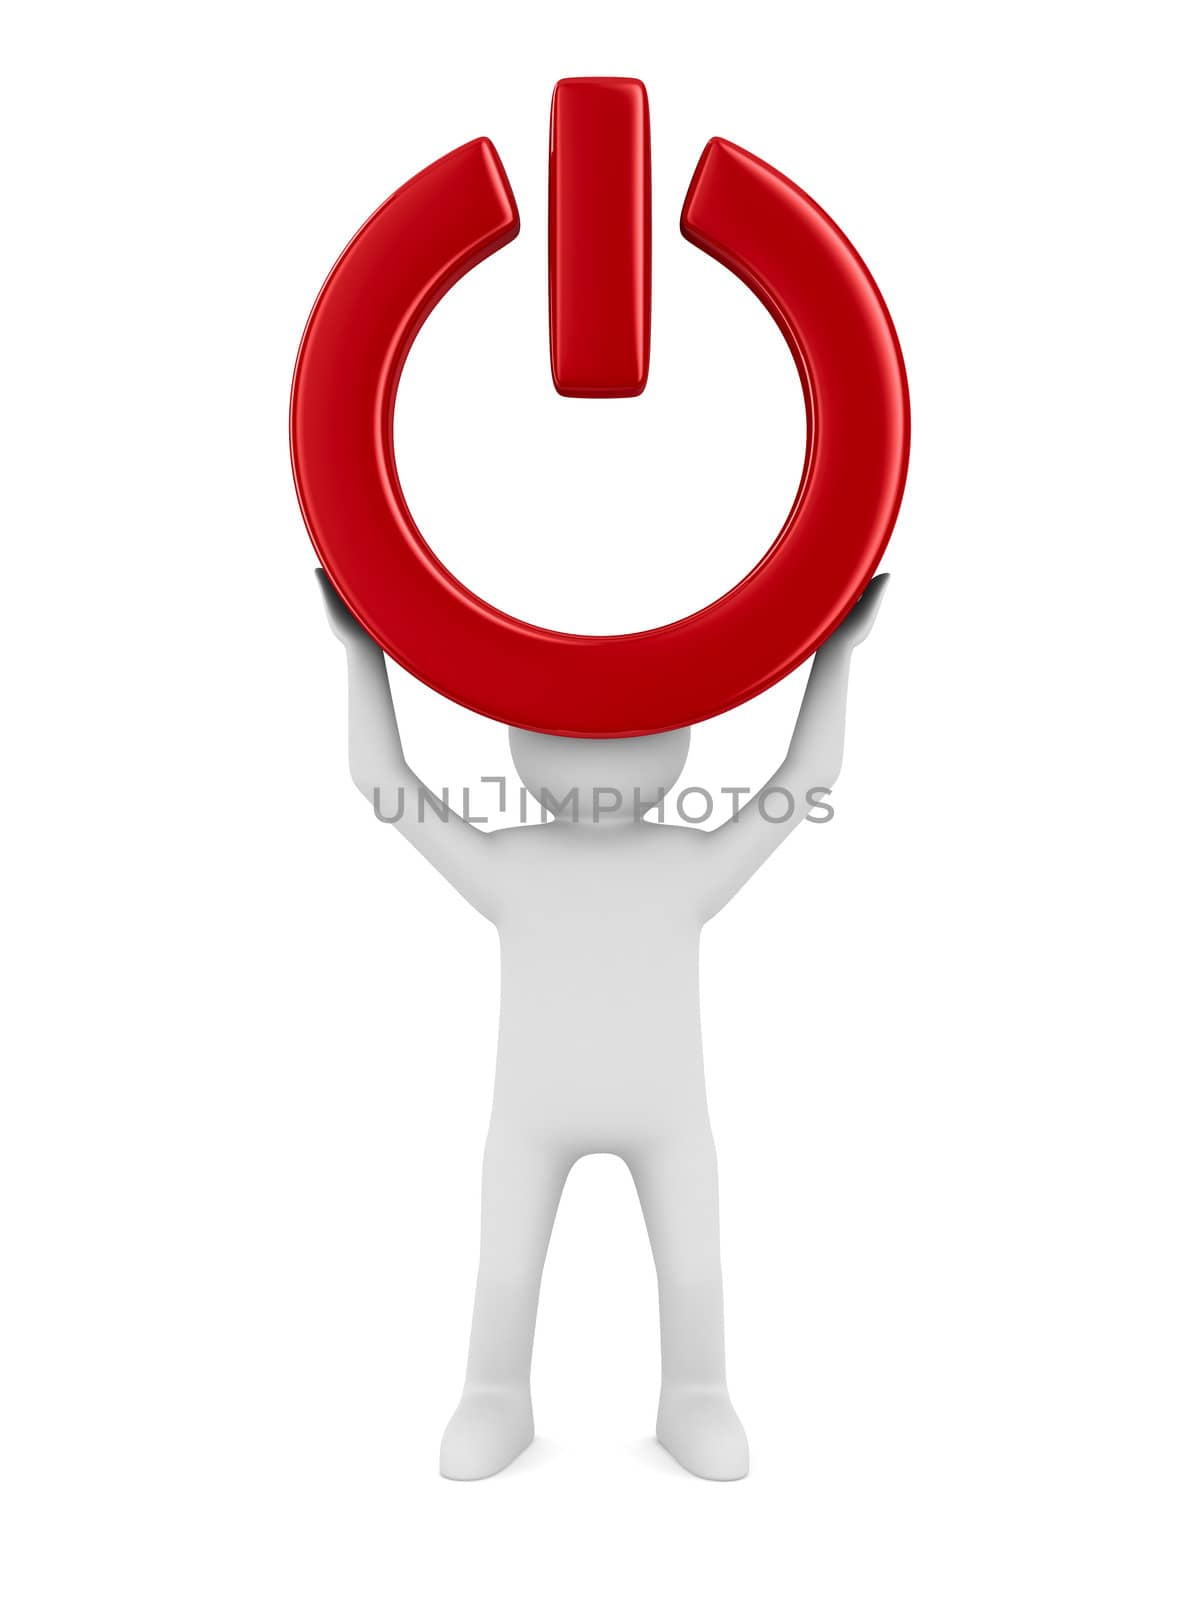 power sign on white background. Isolated 3D image